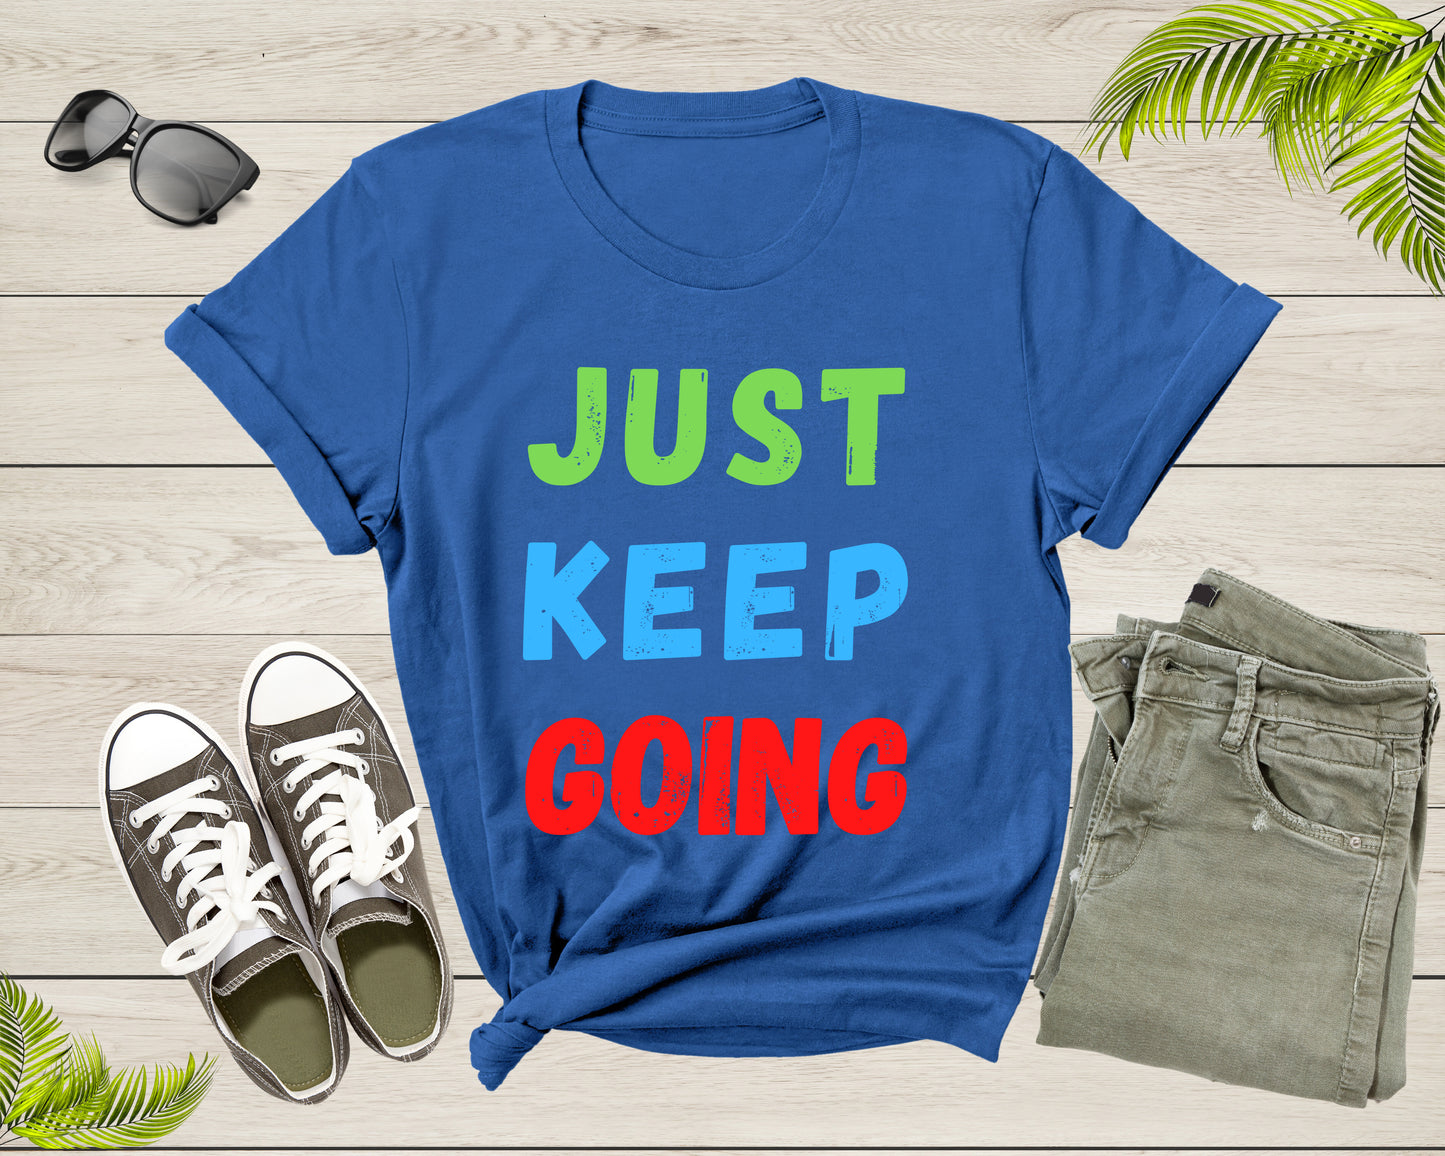 Just Keep Going Colorful Motivational Inspire for Men Women T-Shirt Motivational Quote Gift T Shirt for Teens Kids Boys Girls Tshirt